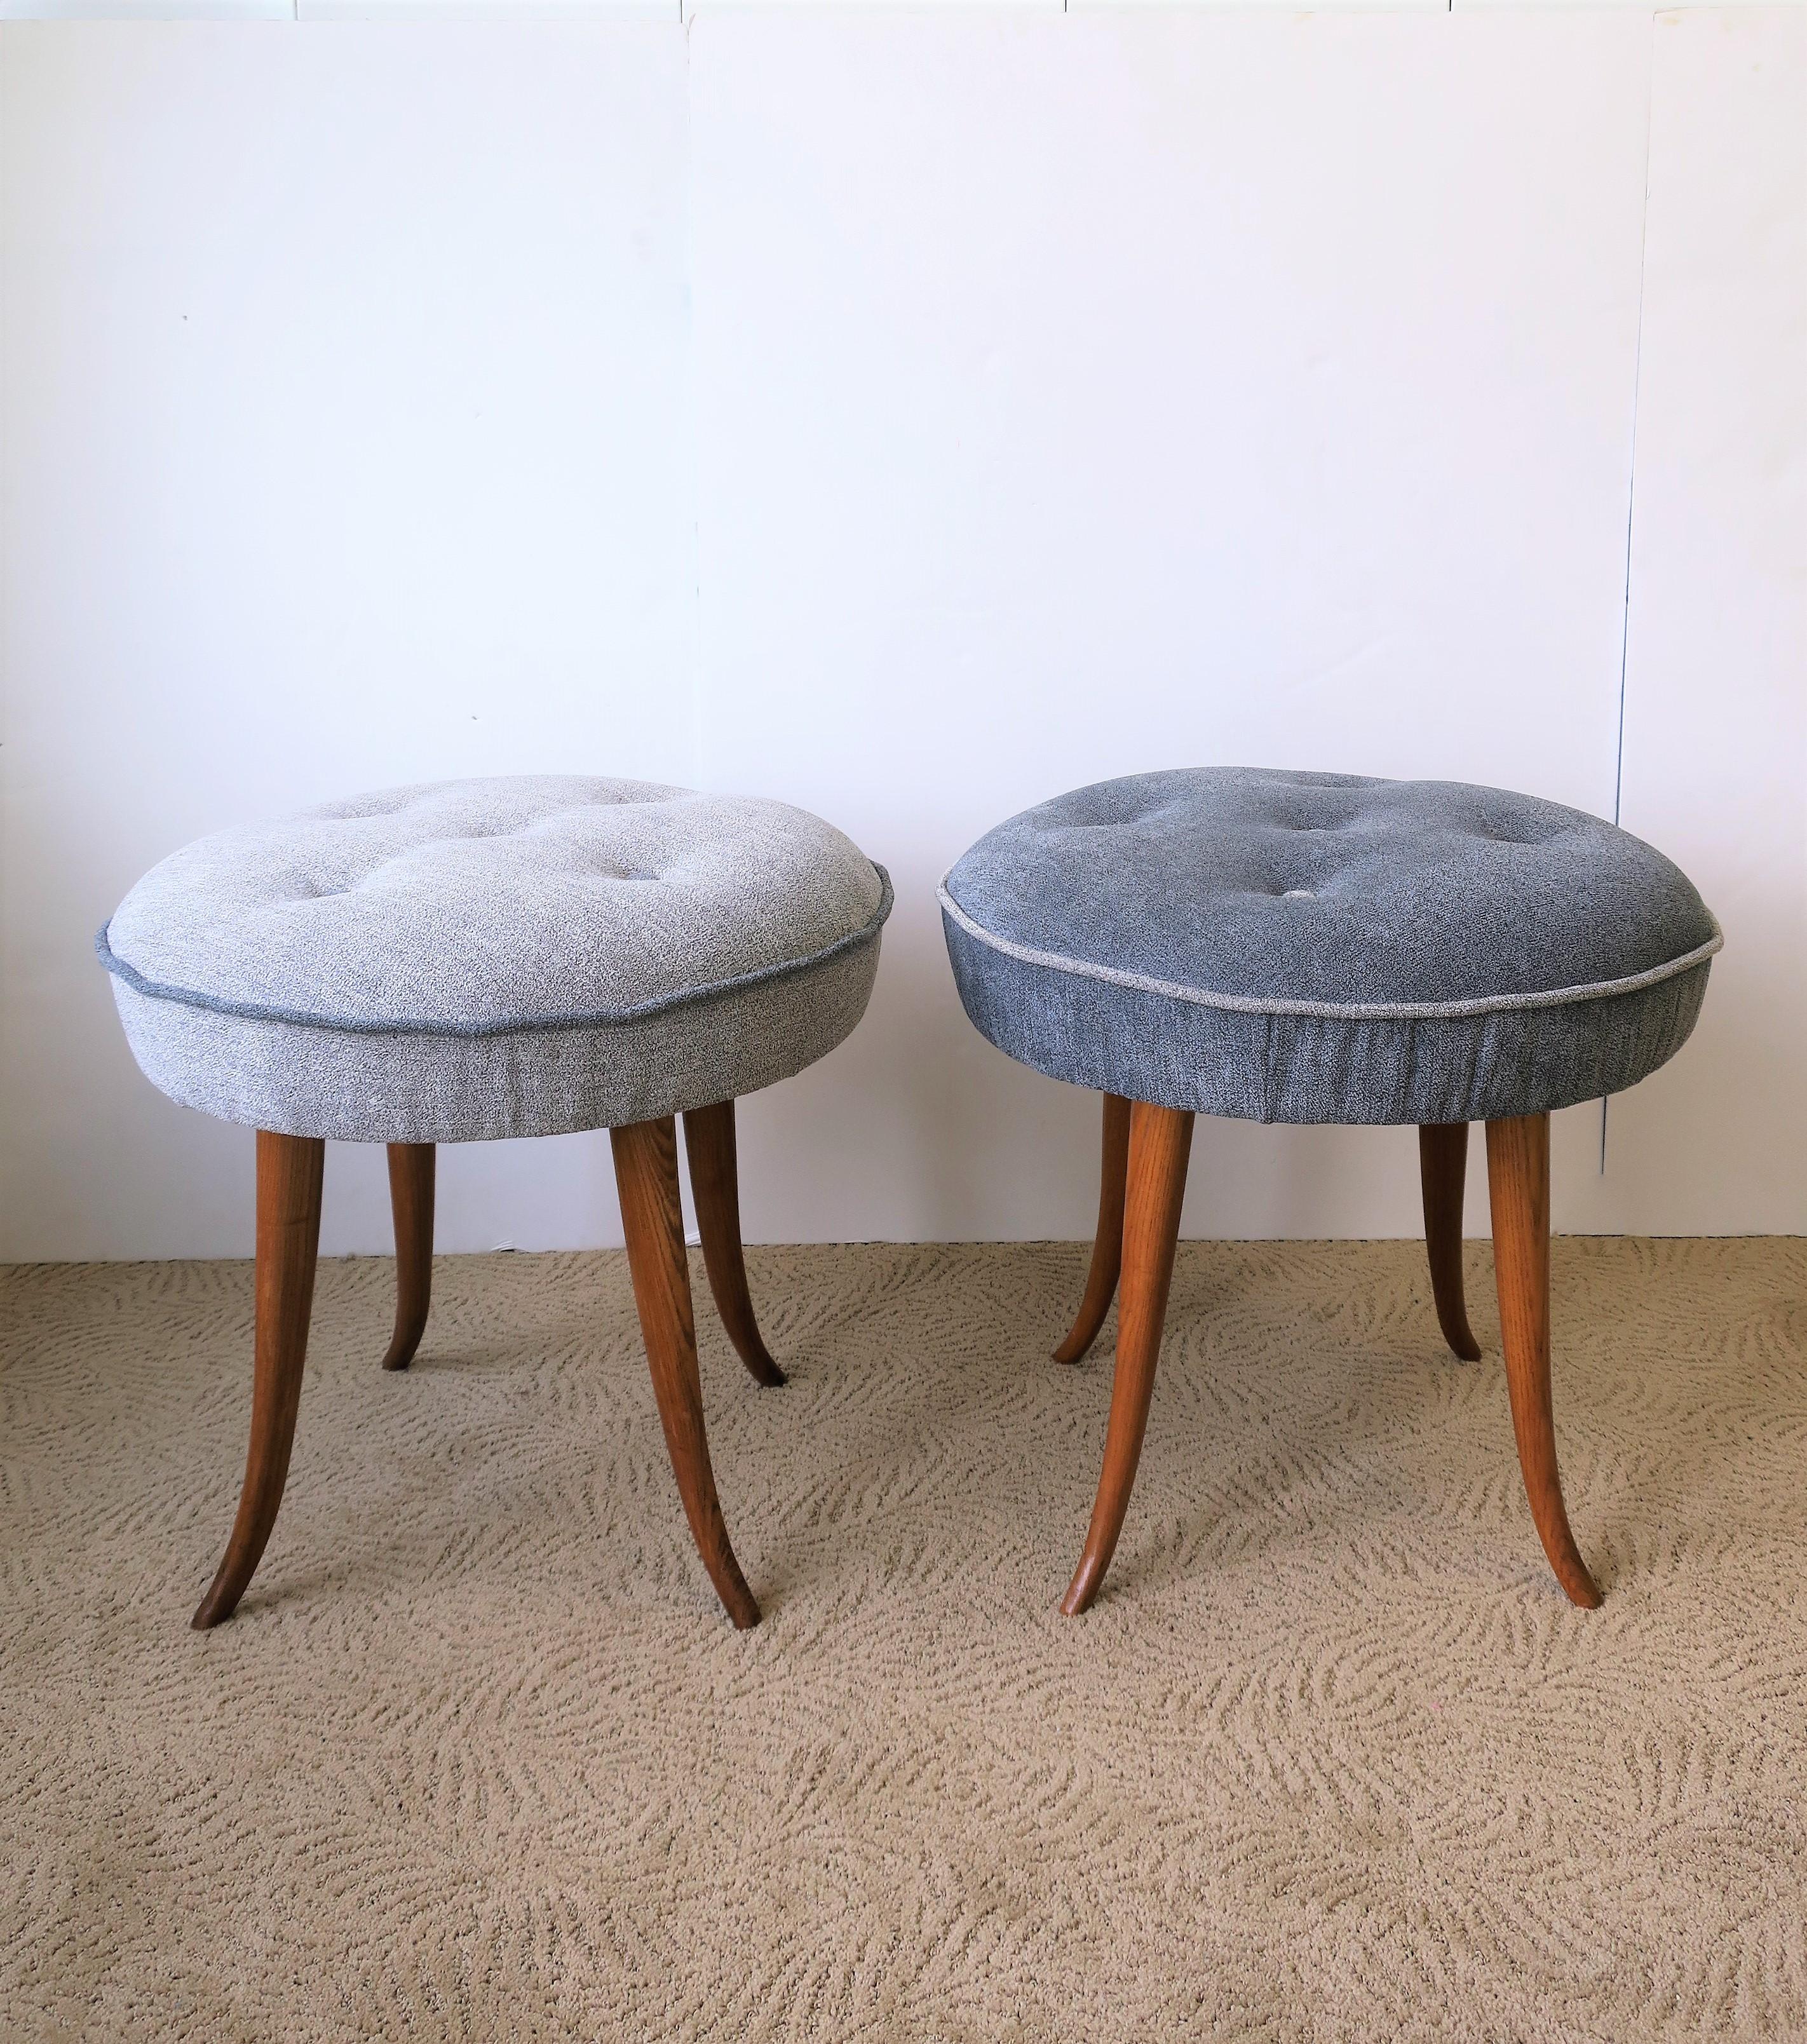 20th Century Austrian Blue Upholstered Wood Stools after Josef Frank, Pair